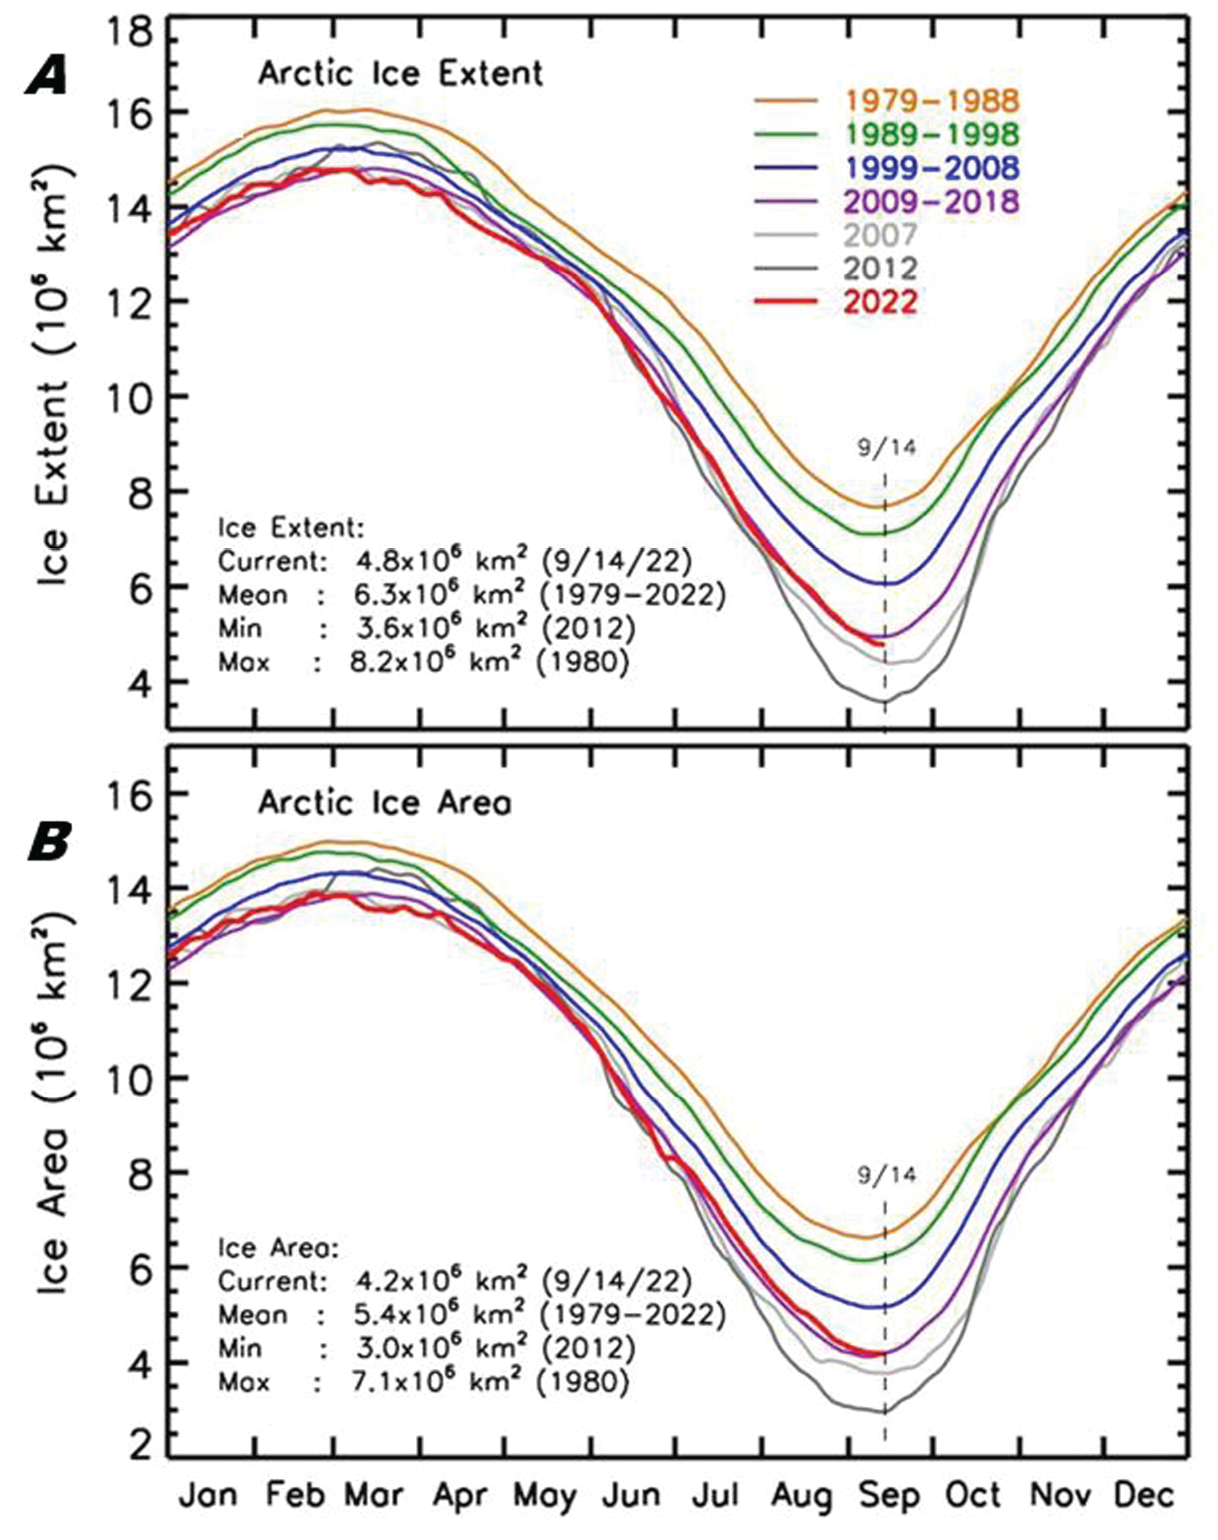 Colored lines on 2 graphs indicate monthly variations in different time periods for
                     the extent and area, respectively, of Arctic sea ice. A vertical dashed line in each
                     graph indicates September 14.